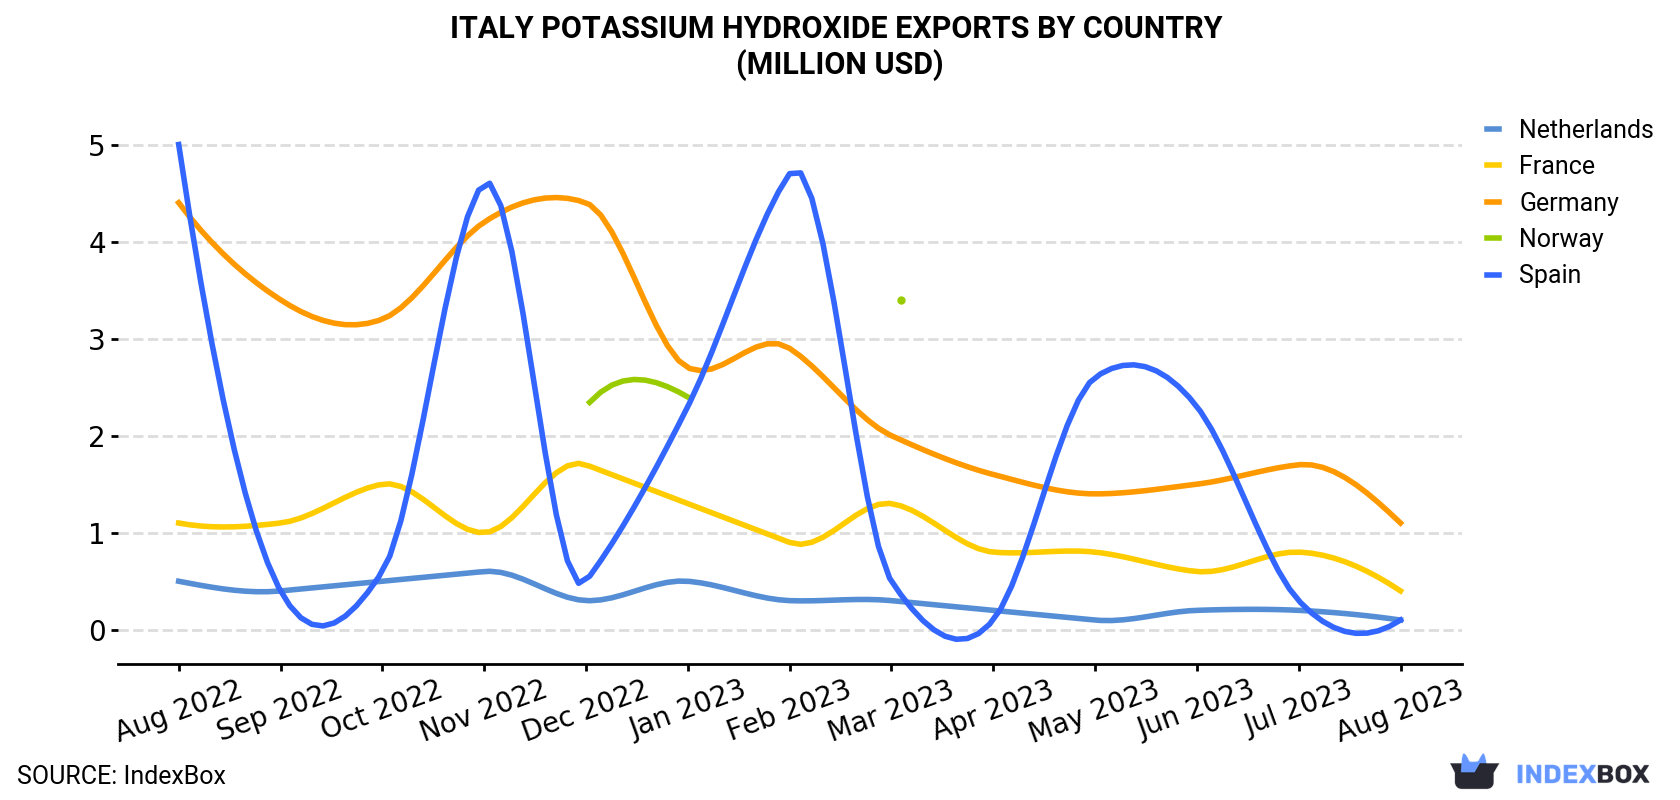 Italy Potassium Hydroxide Exports By Country (Million USD)